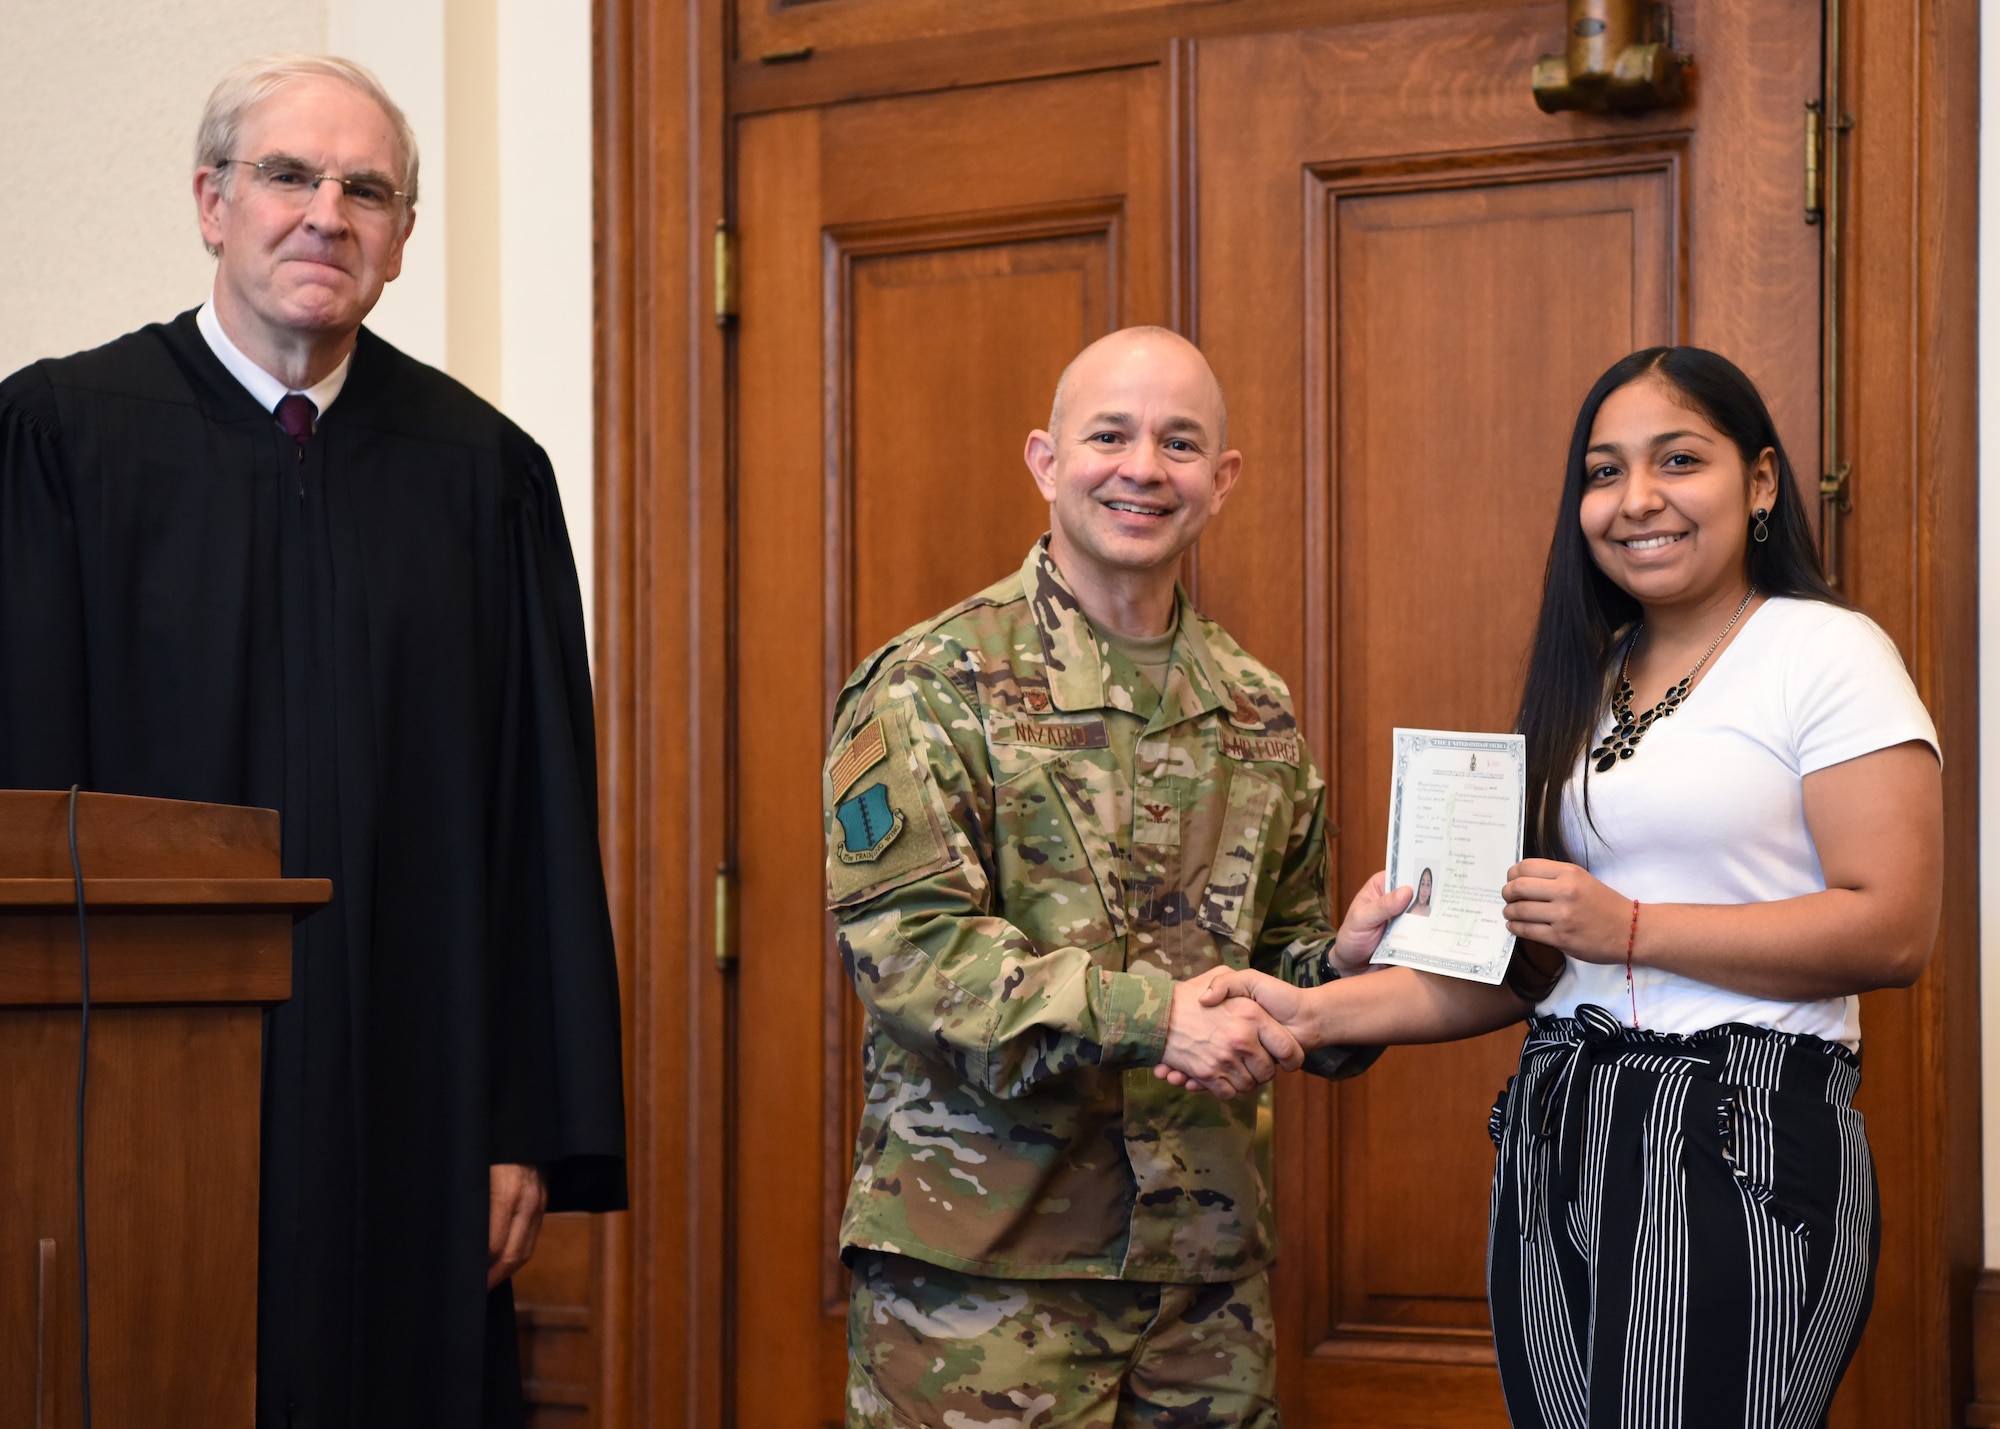 U.S. Air Force Col. Andres Nazario, 17th Training Wing commander presents a certificate to Ruth Sandate Garcia, a new U.S. citizen at the Naturalization Ceremony in the O.C. Fisher Federal Building September 4, 2019. Sandate Garcia was the youngest member of the group at 20 years old. (U.S. Air Force photo by Airman 1st Class Ethan Sherwood)